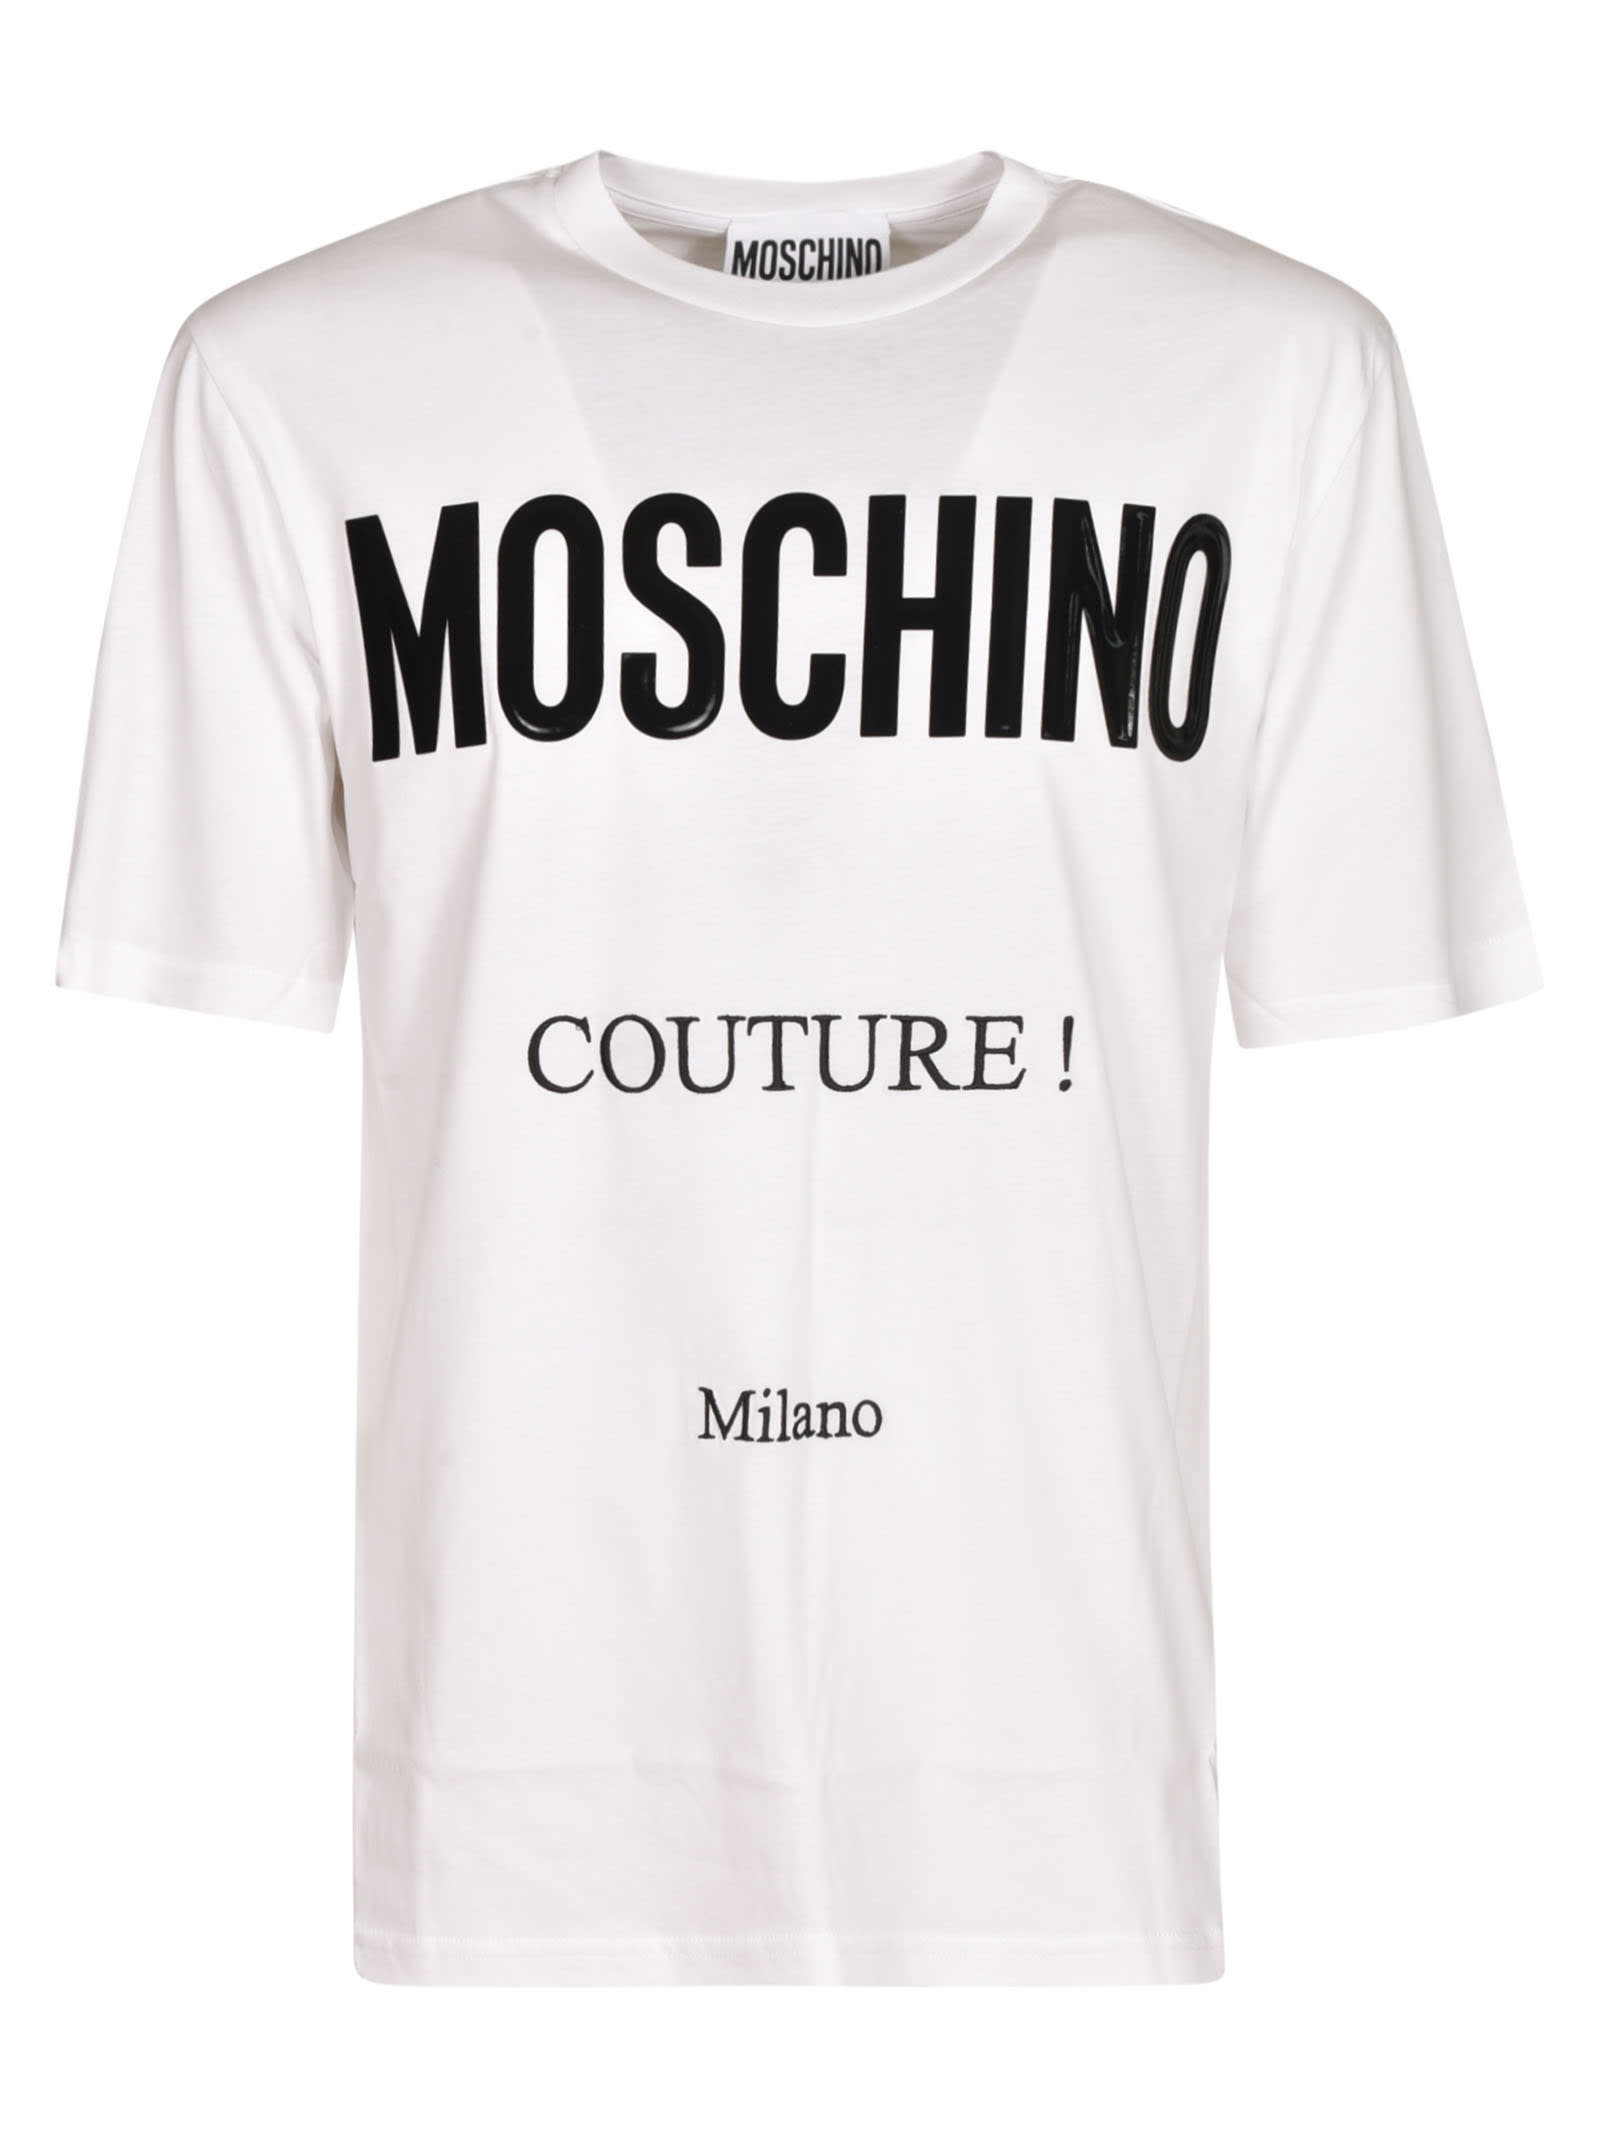 Moschino Classic Couture Print T-shirt